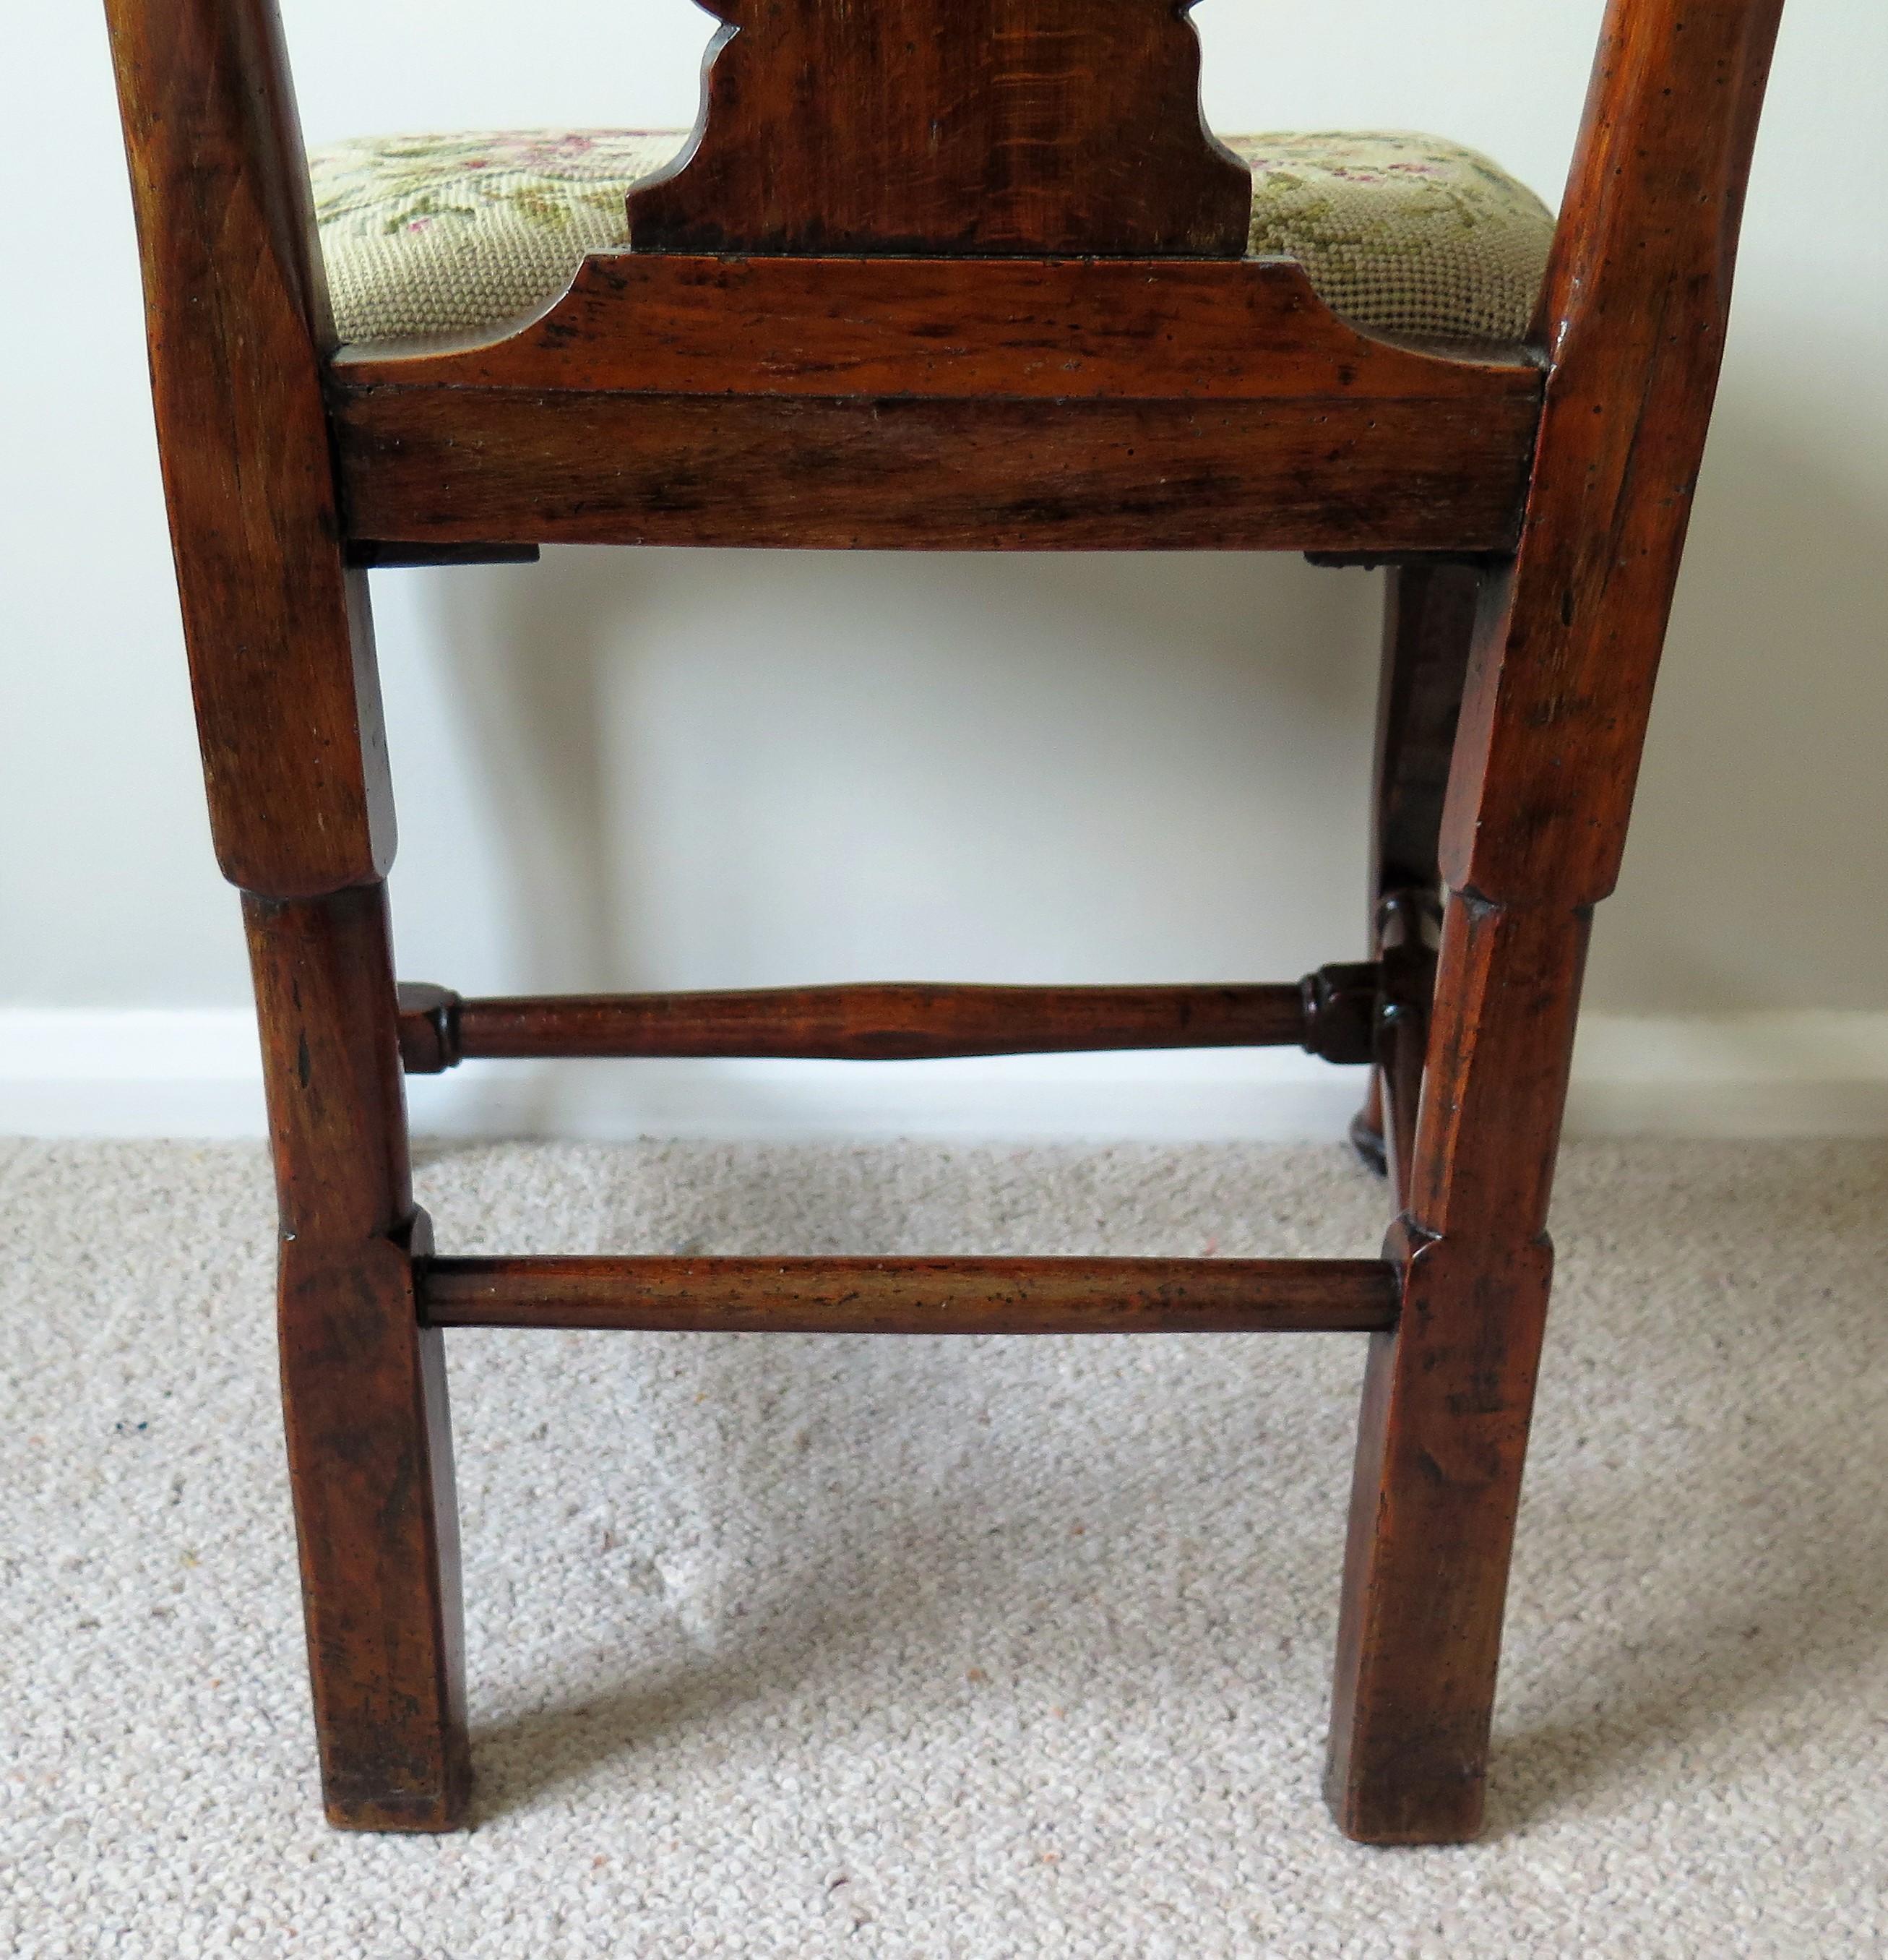 18th Century Queen Anne Period Walnut Chair Cabriole Legs and Stretchers, English circa 1700 For Sale